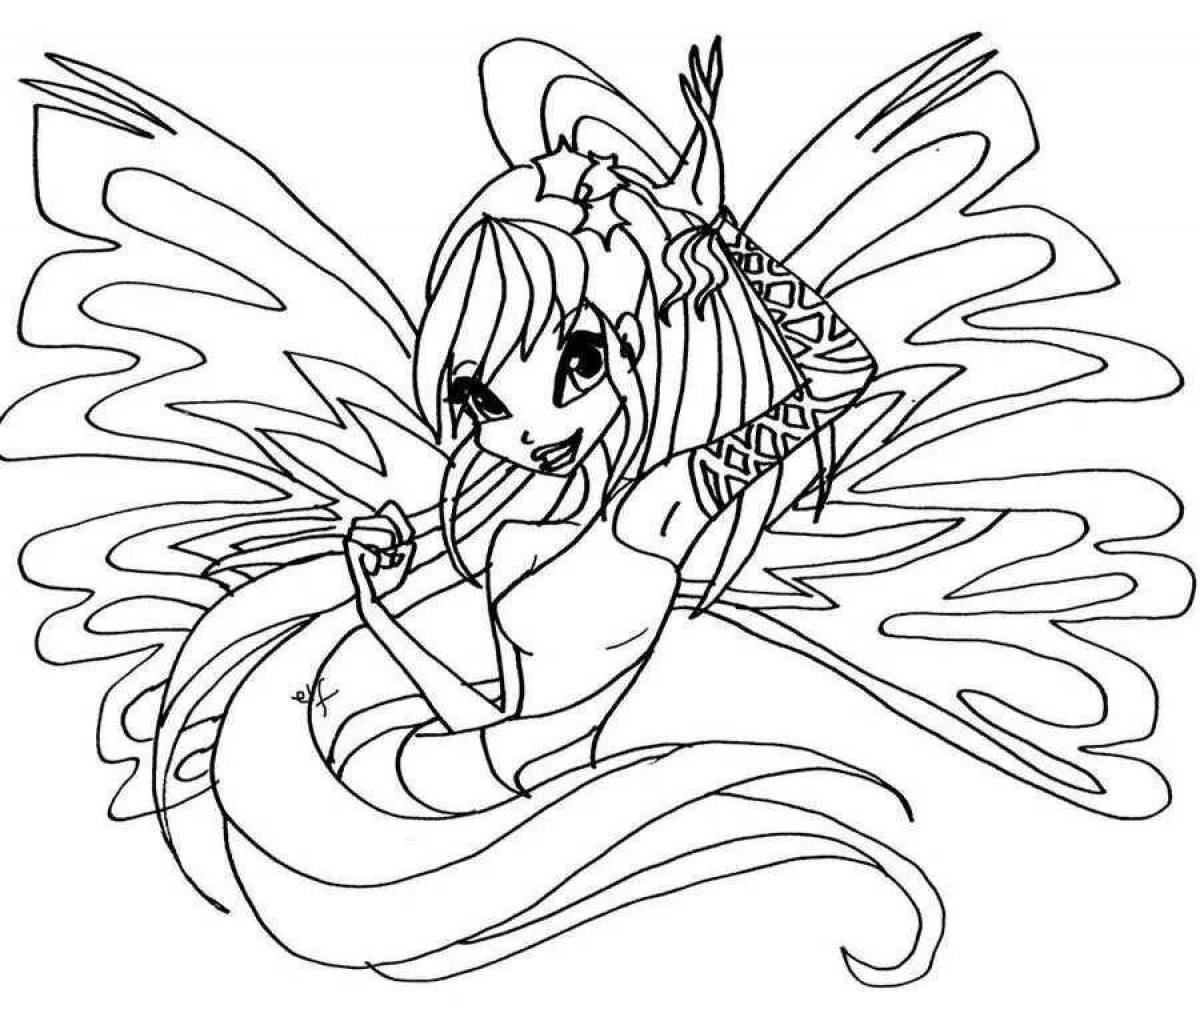 Dazzling winx coloring book for kids